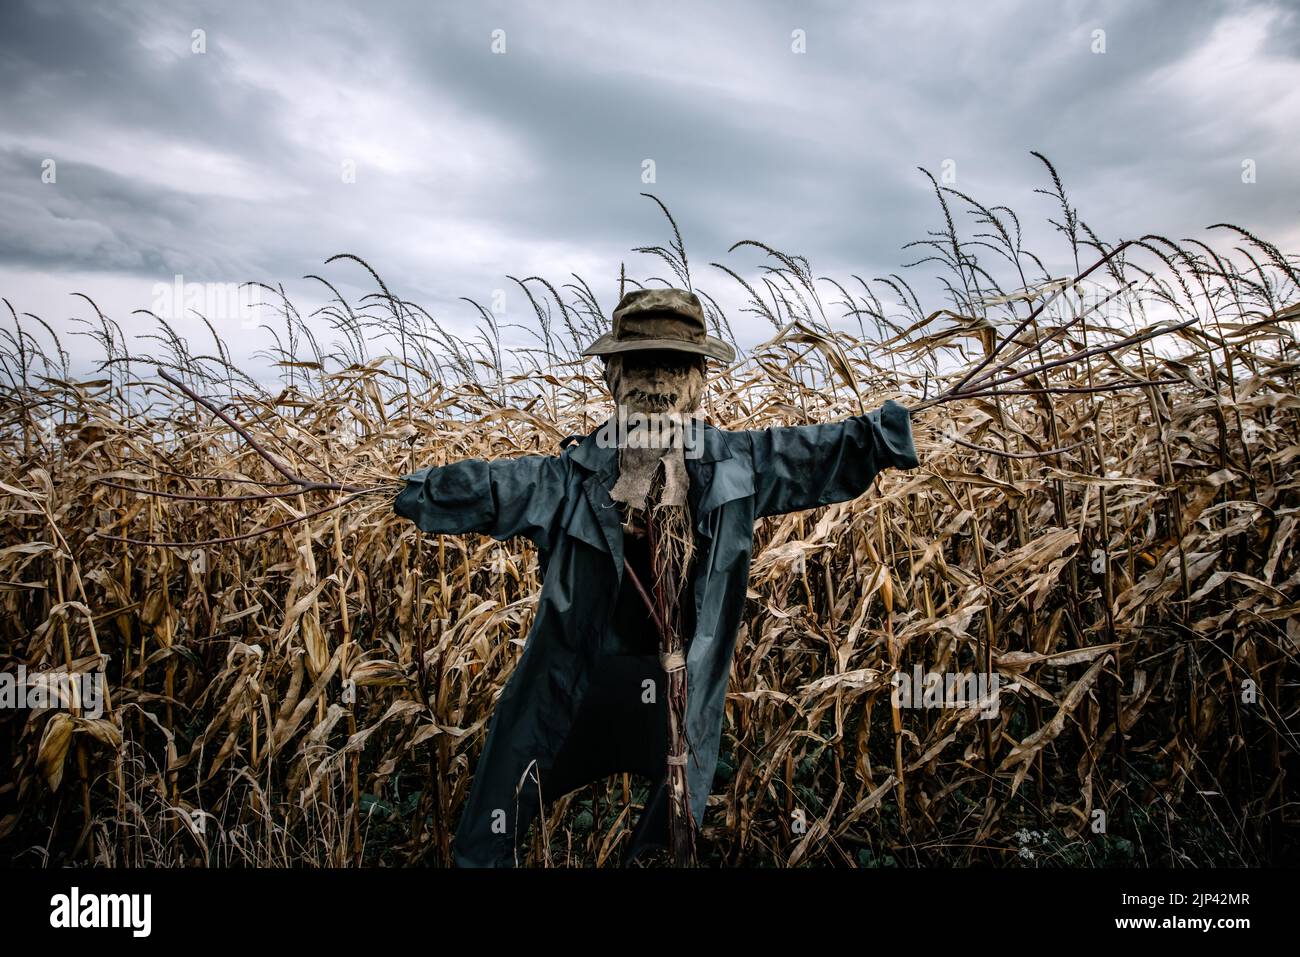 Scary scarecrow in a hat and coat on a evening autumn cornfield. Spooky Halloween holiday concept. Halloweens background Stock Photo